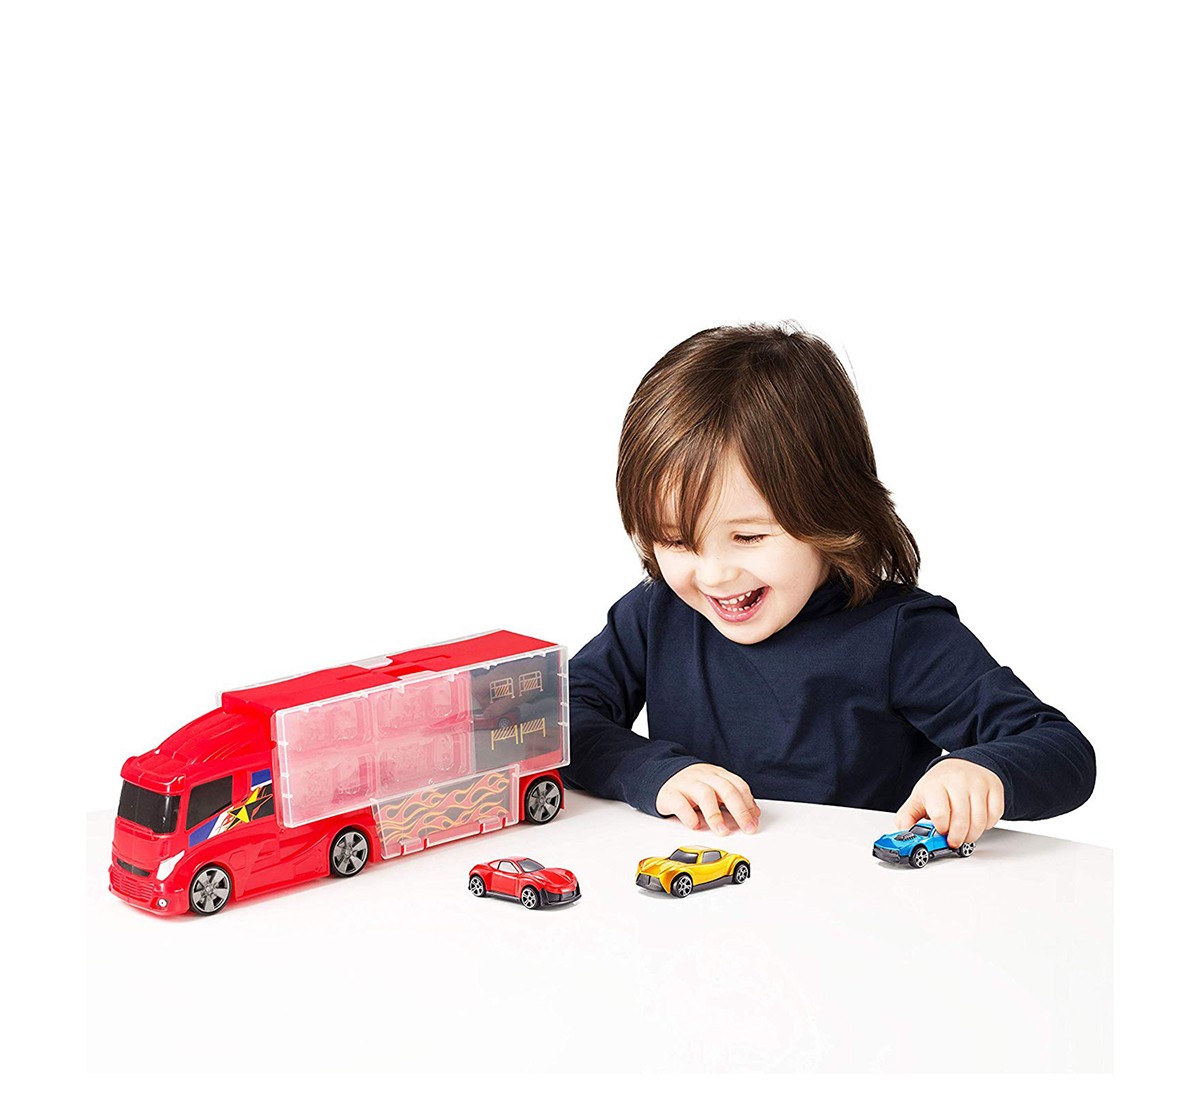 Teamsterz Truck Carry Case-4 Cars Tracksets & Train Sets for Kids age 3Y+ 